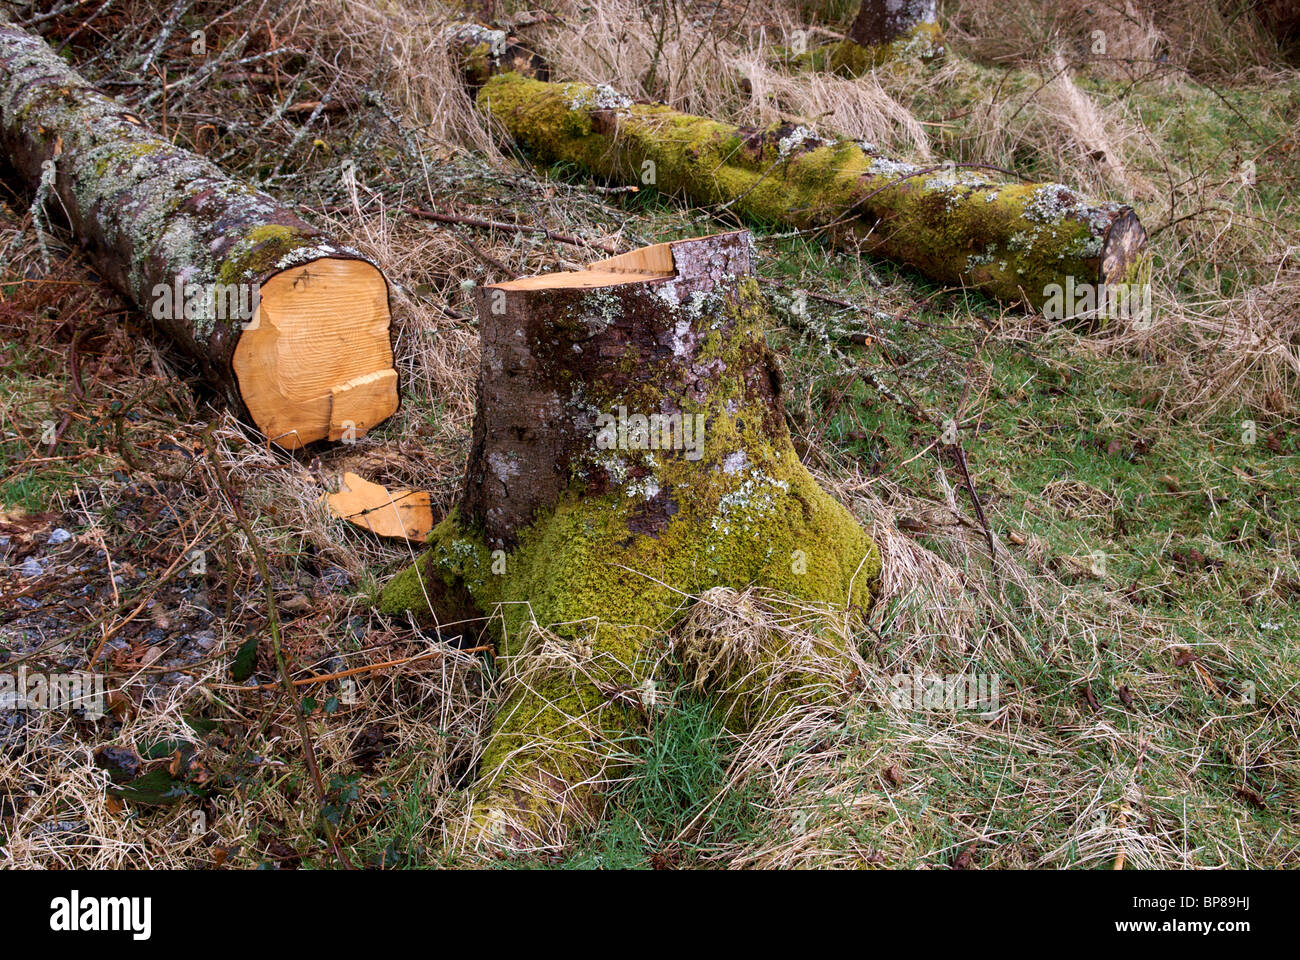 Chopped wood piled in the forest of Salen, close to the water's edge of Loch Sunart, Scotland, UK Stock Photo